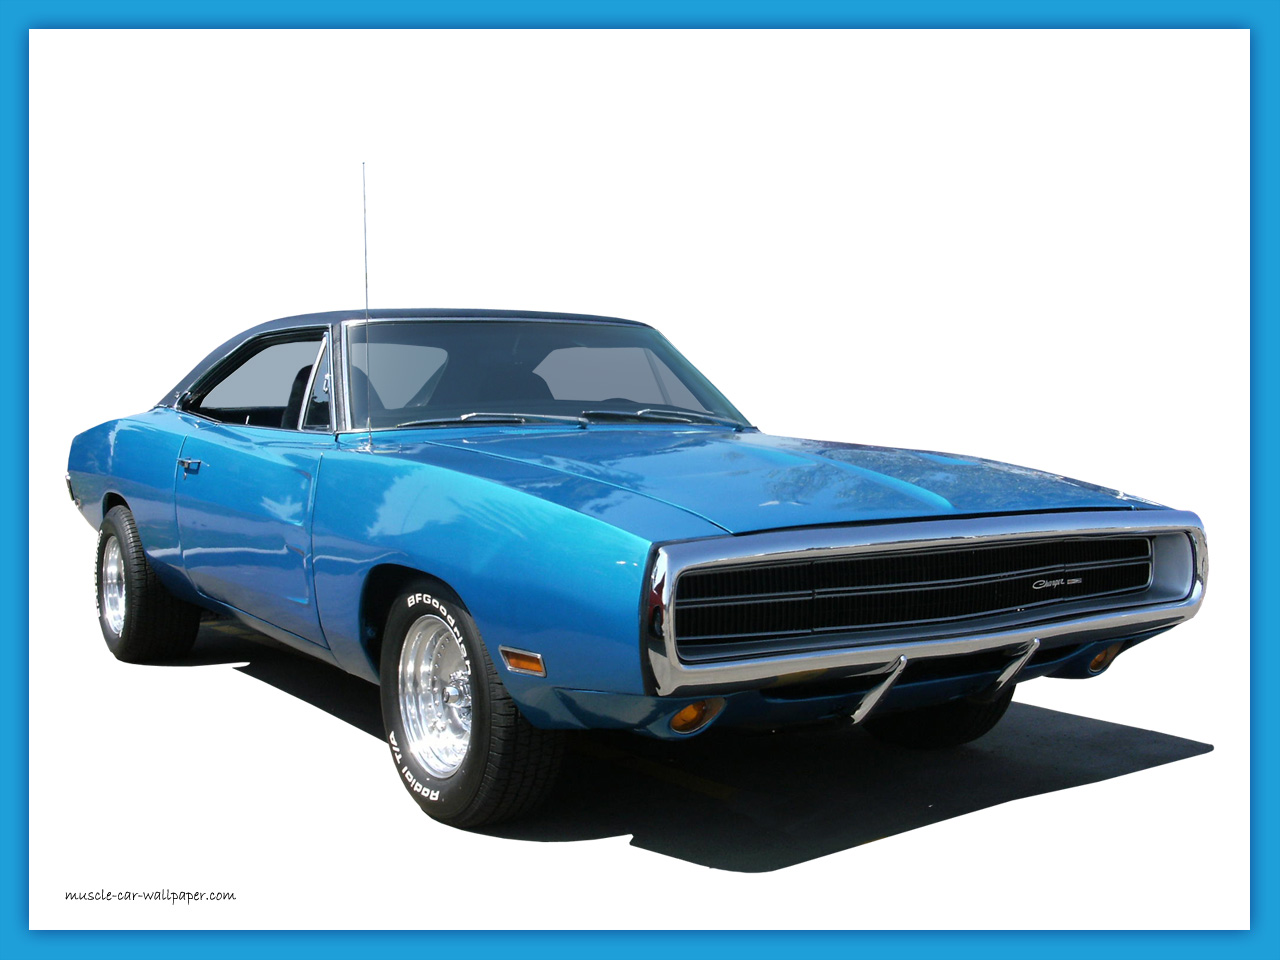 1970 Dodge Charger SE Wallpaper   Blue Hardtop   Right Front View